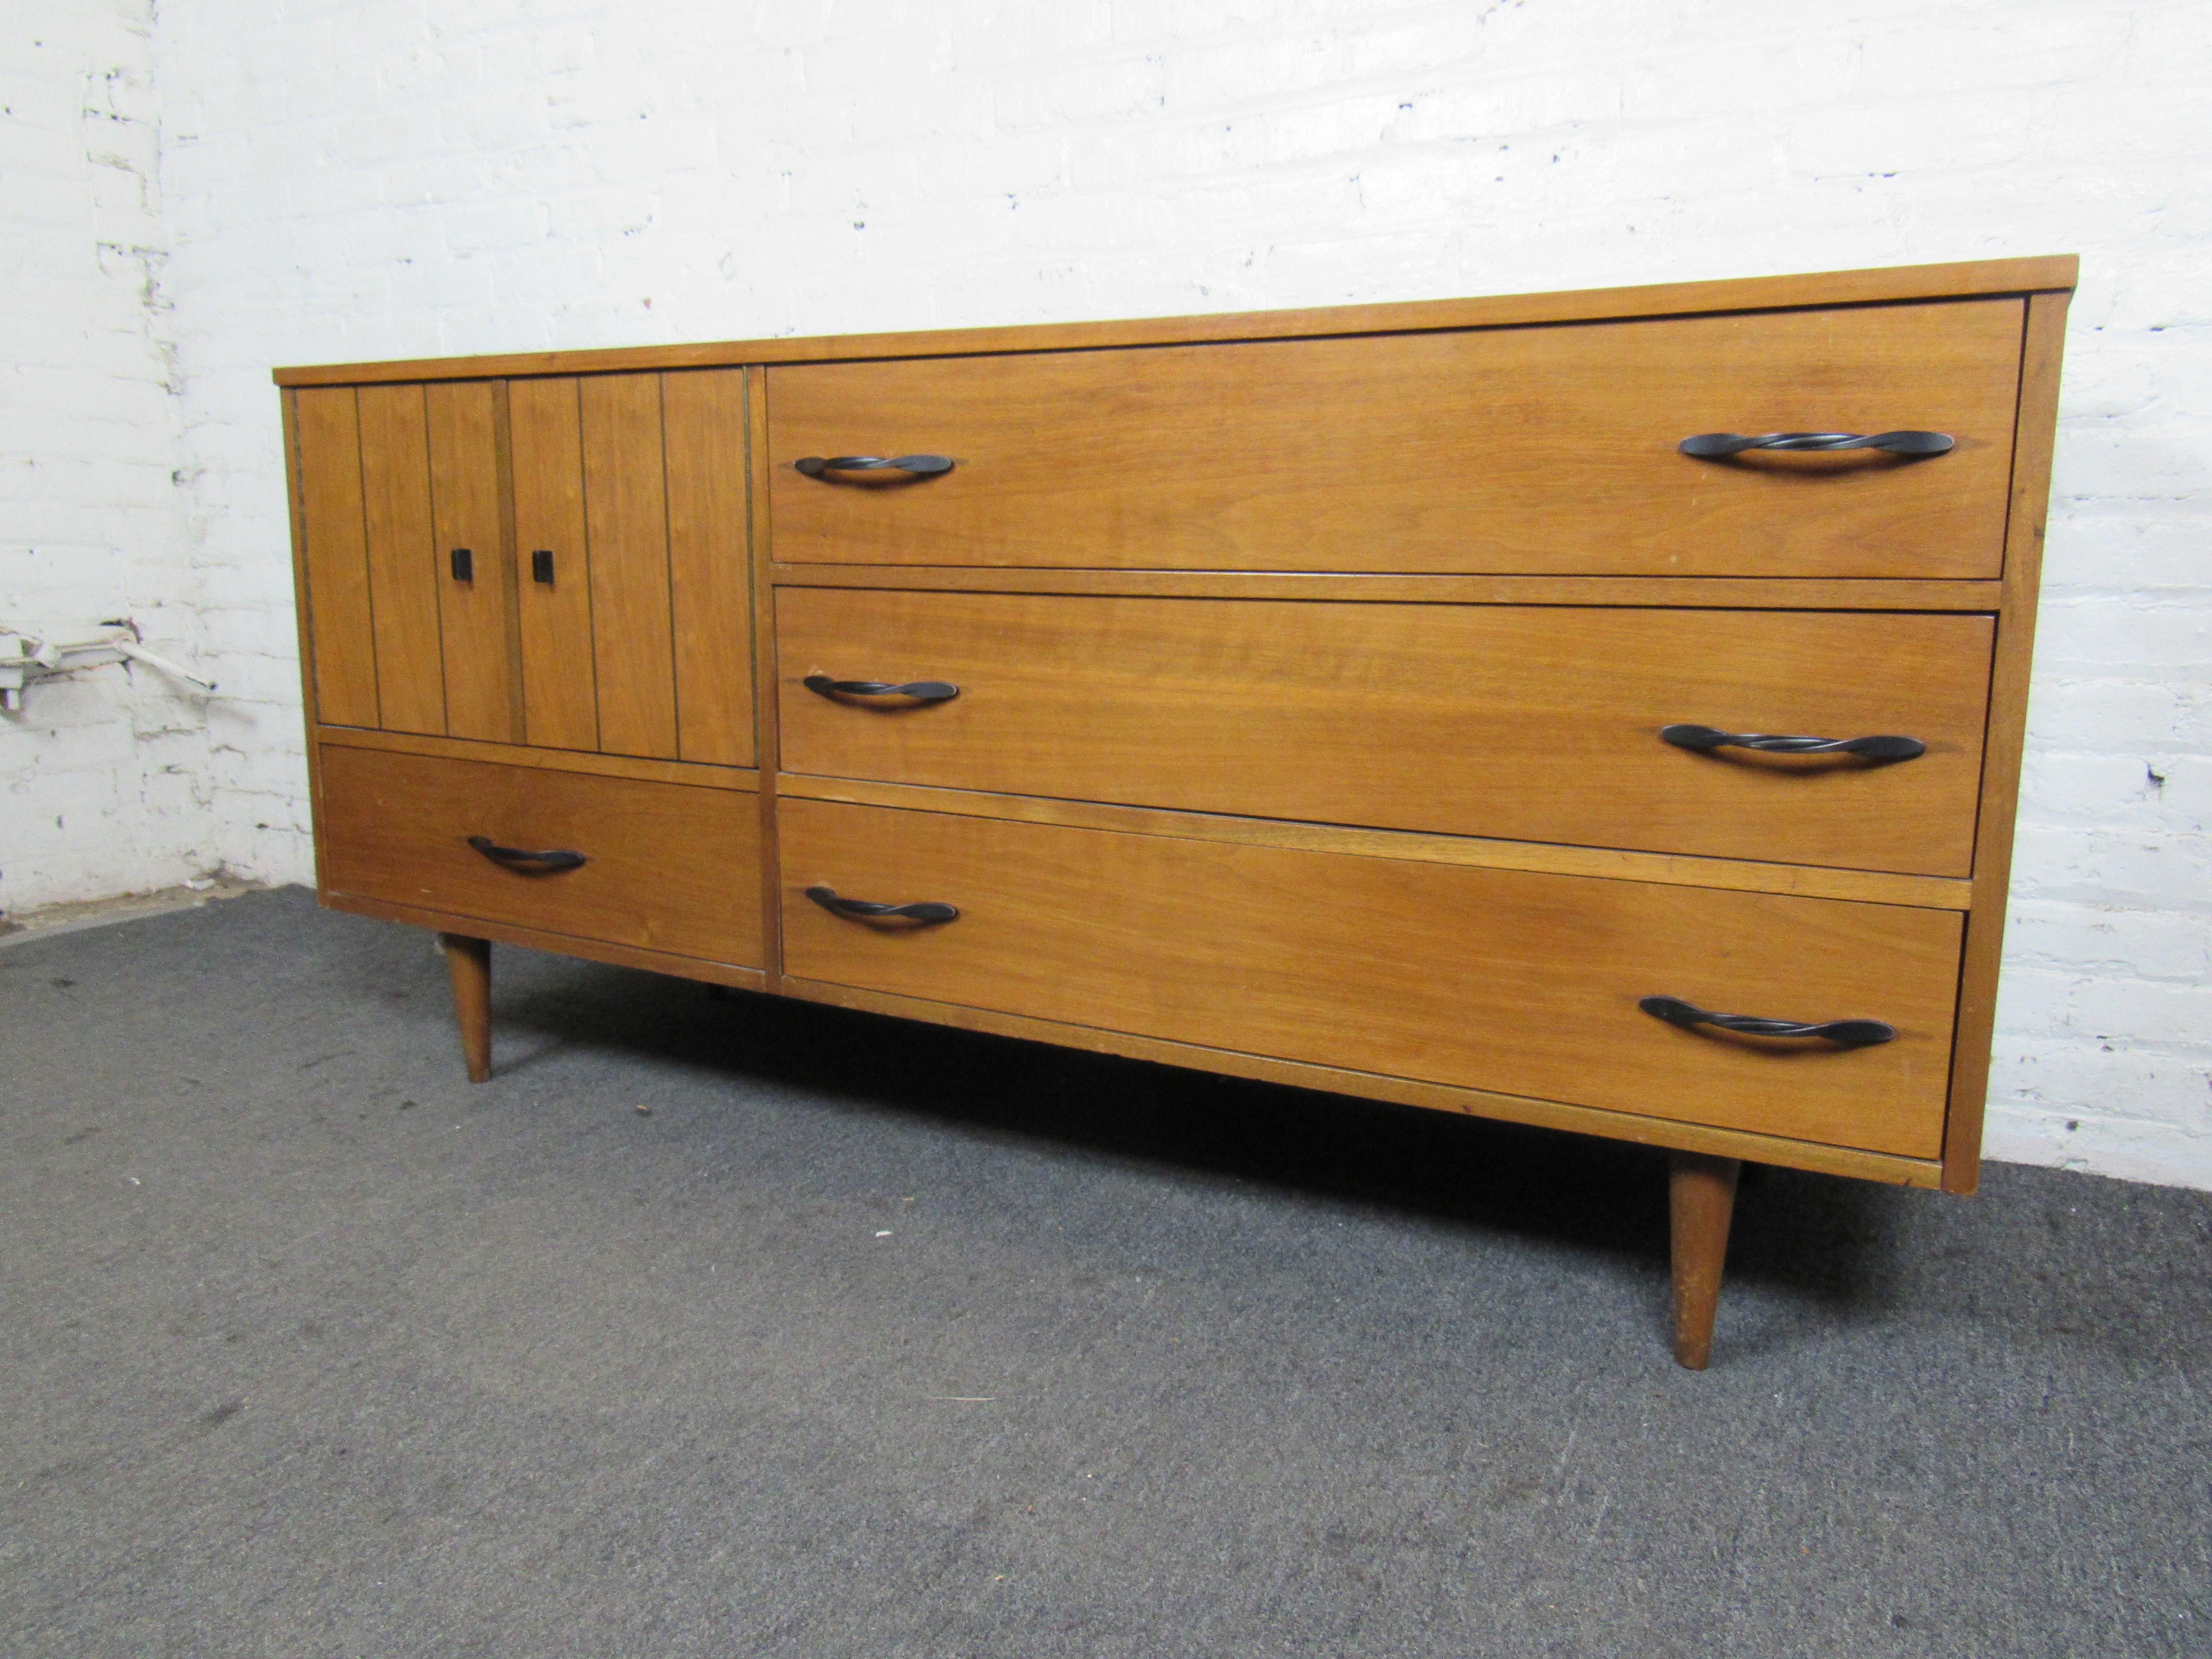 With three wide drawers and two separate storage compartments, this vintage low dresser is great for adding Mid-Century style to any bedroom. Please confirm item location with seller (NY/NJ).